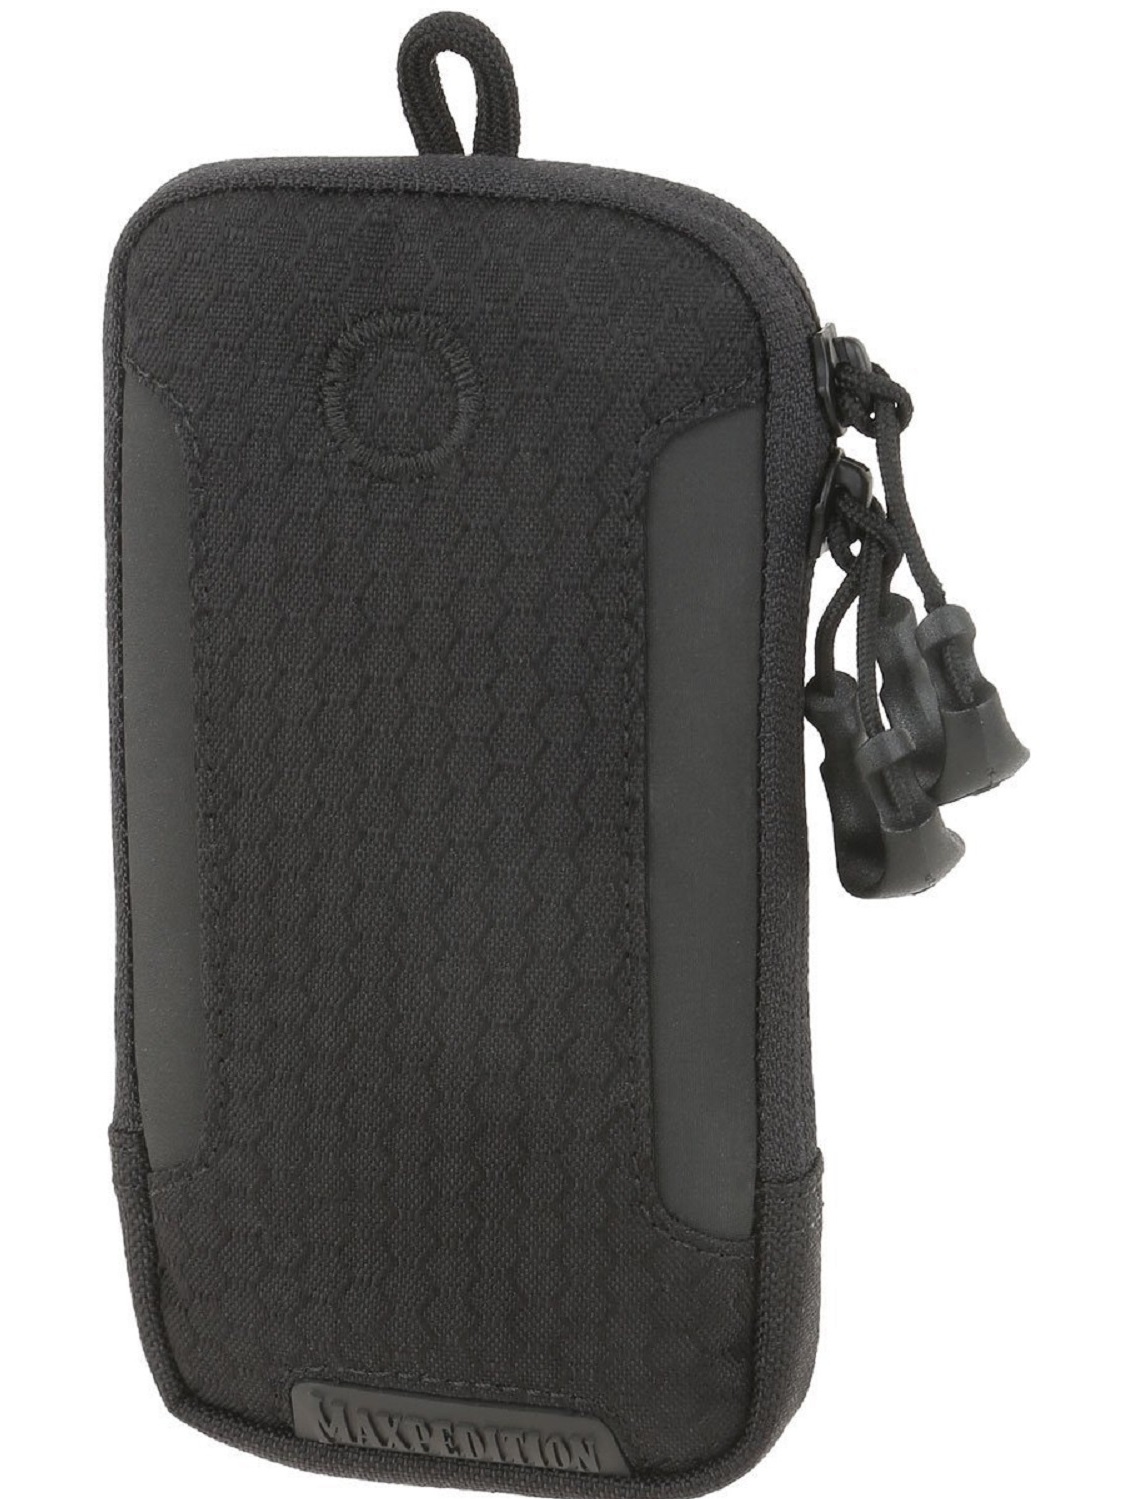 AGR PHP iPhone 6 Pouch Black - image 2 of 2